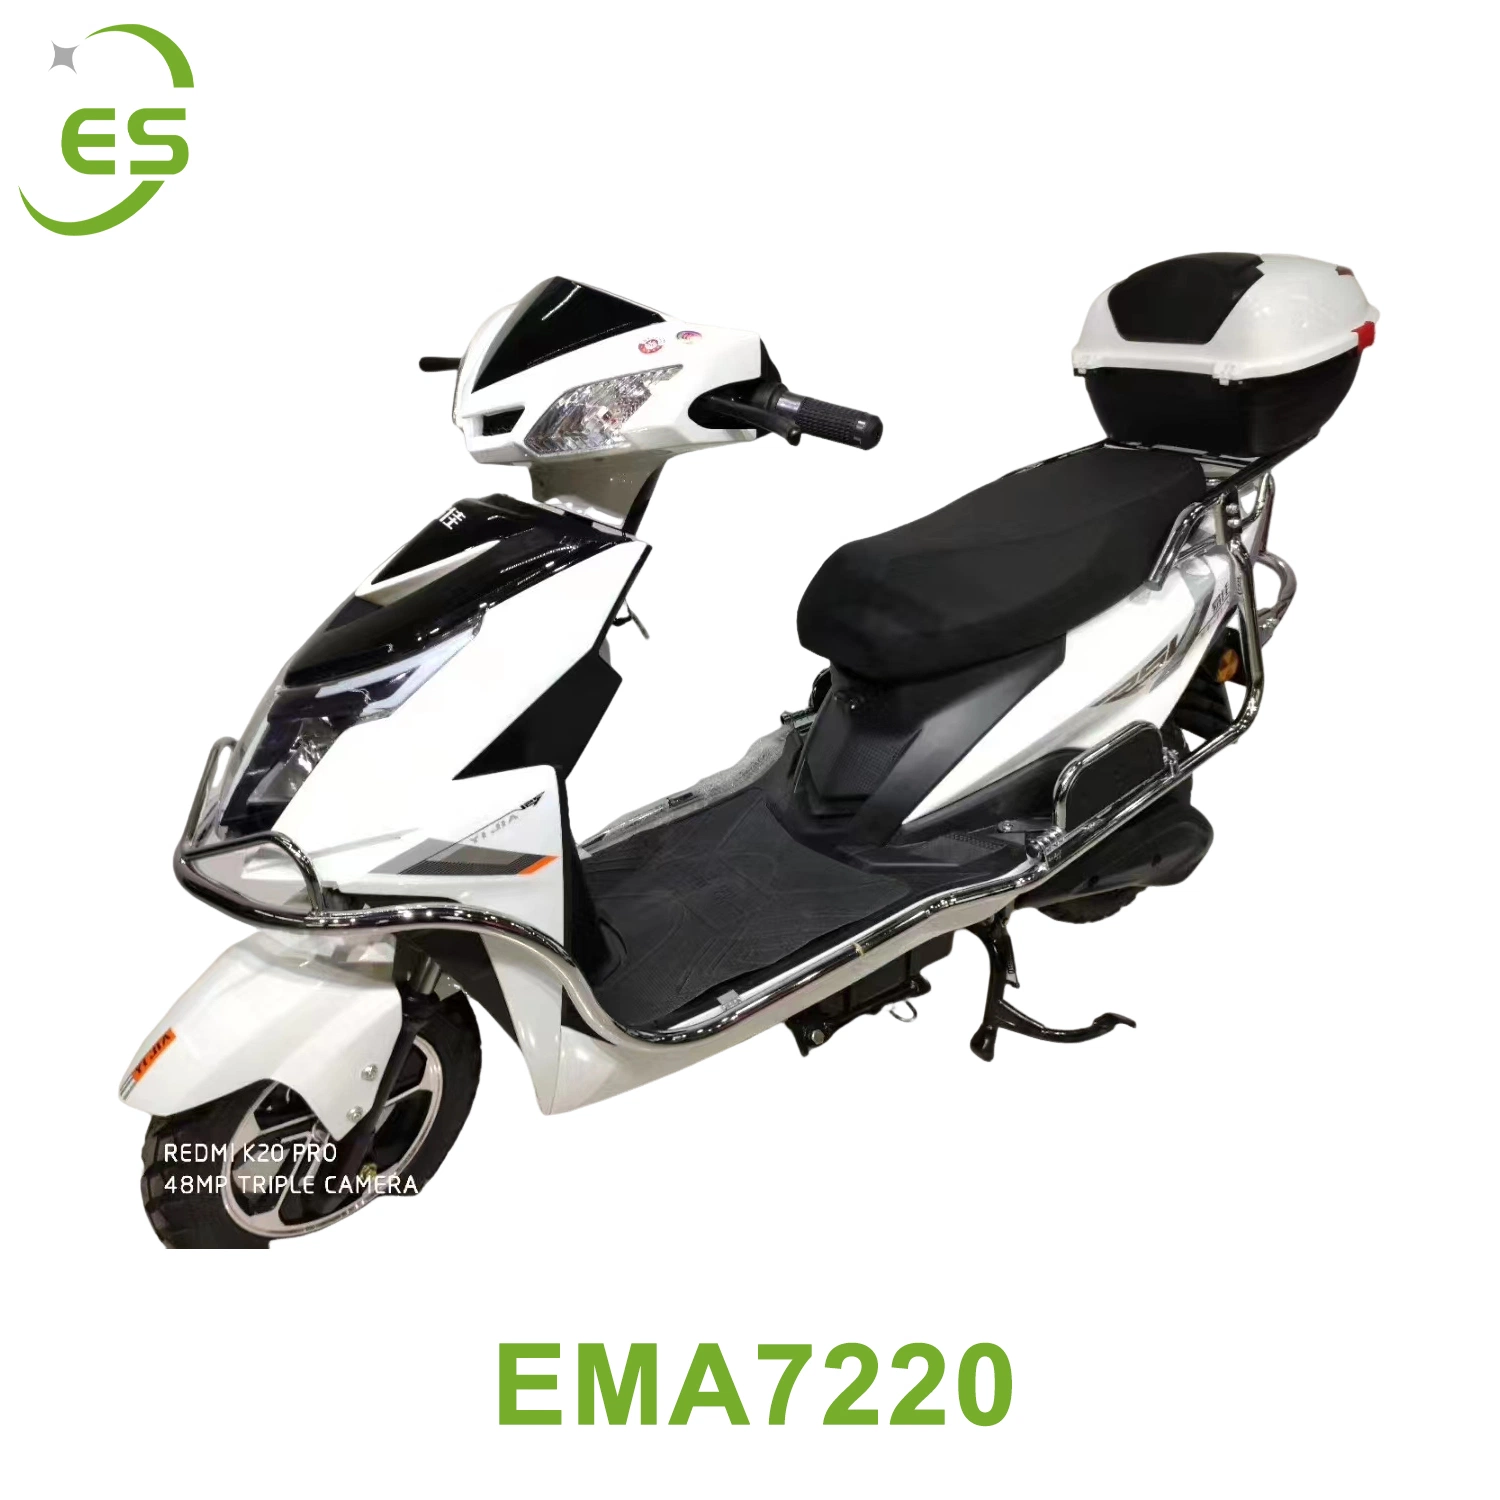 EMA7220 China Price Electric Scooter Electric Motorcycle Factory E-Scooter Hot Sale